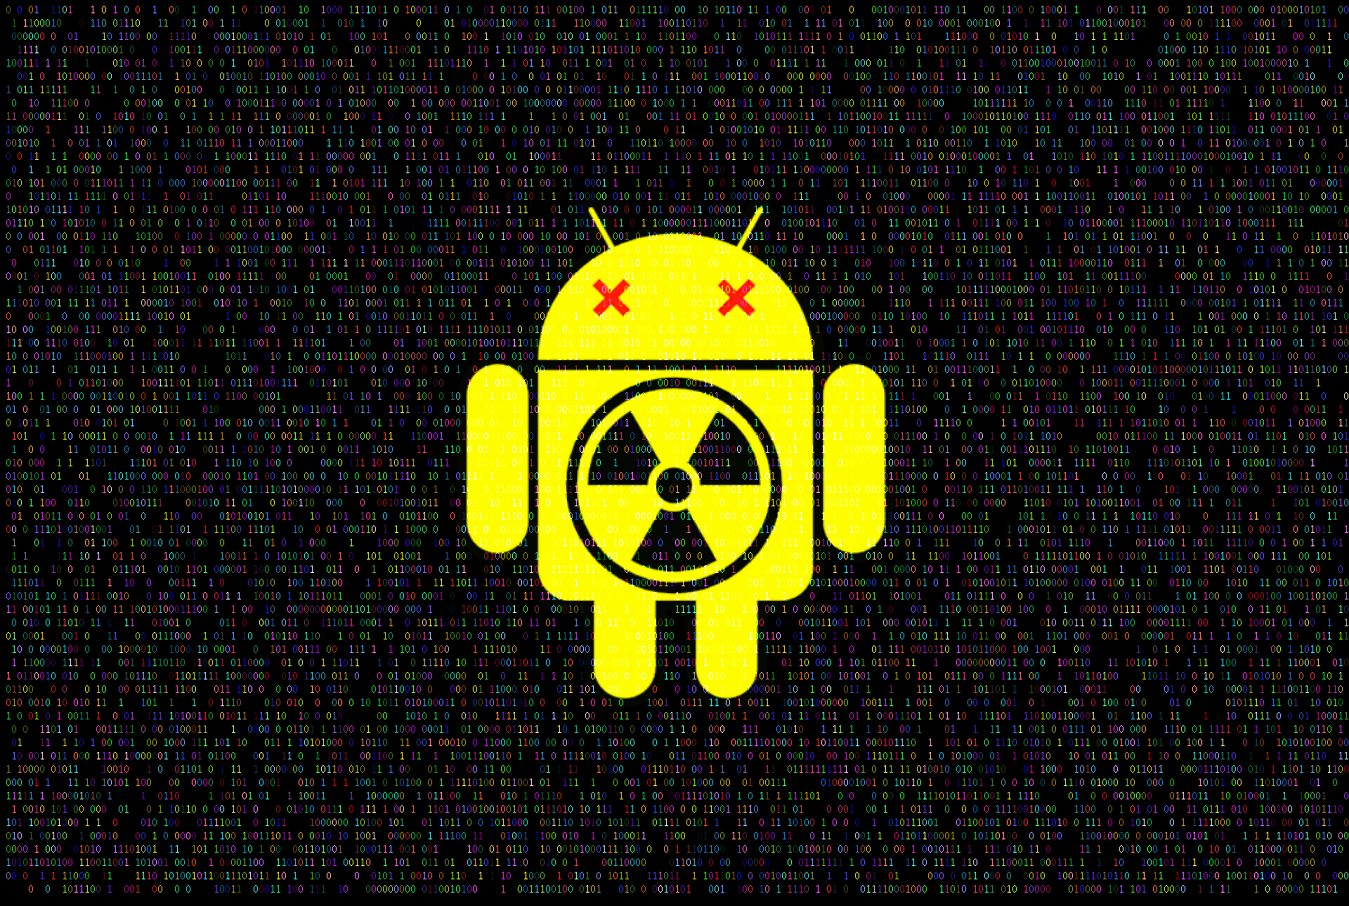 Clipper malware on Play Store replaces victim's BTC & ETH wallet address